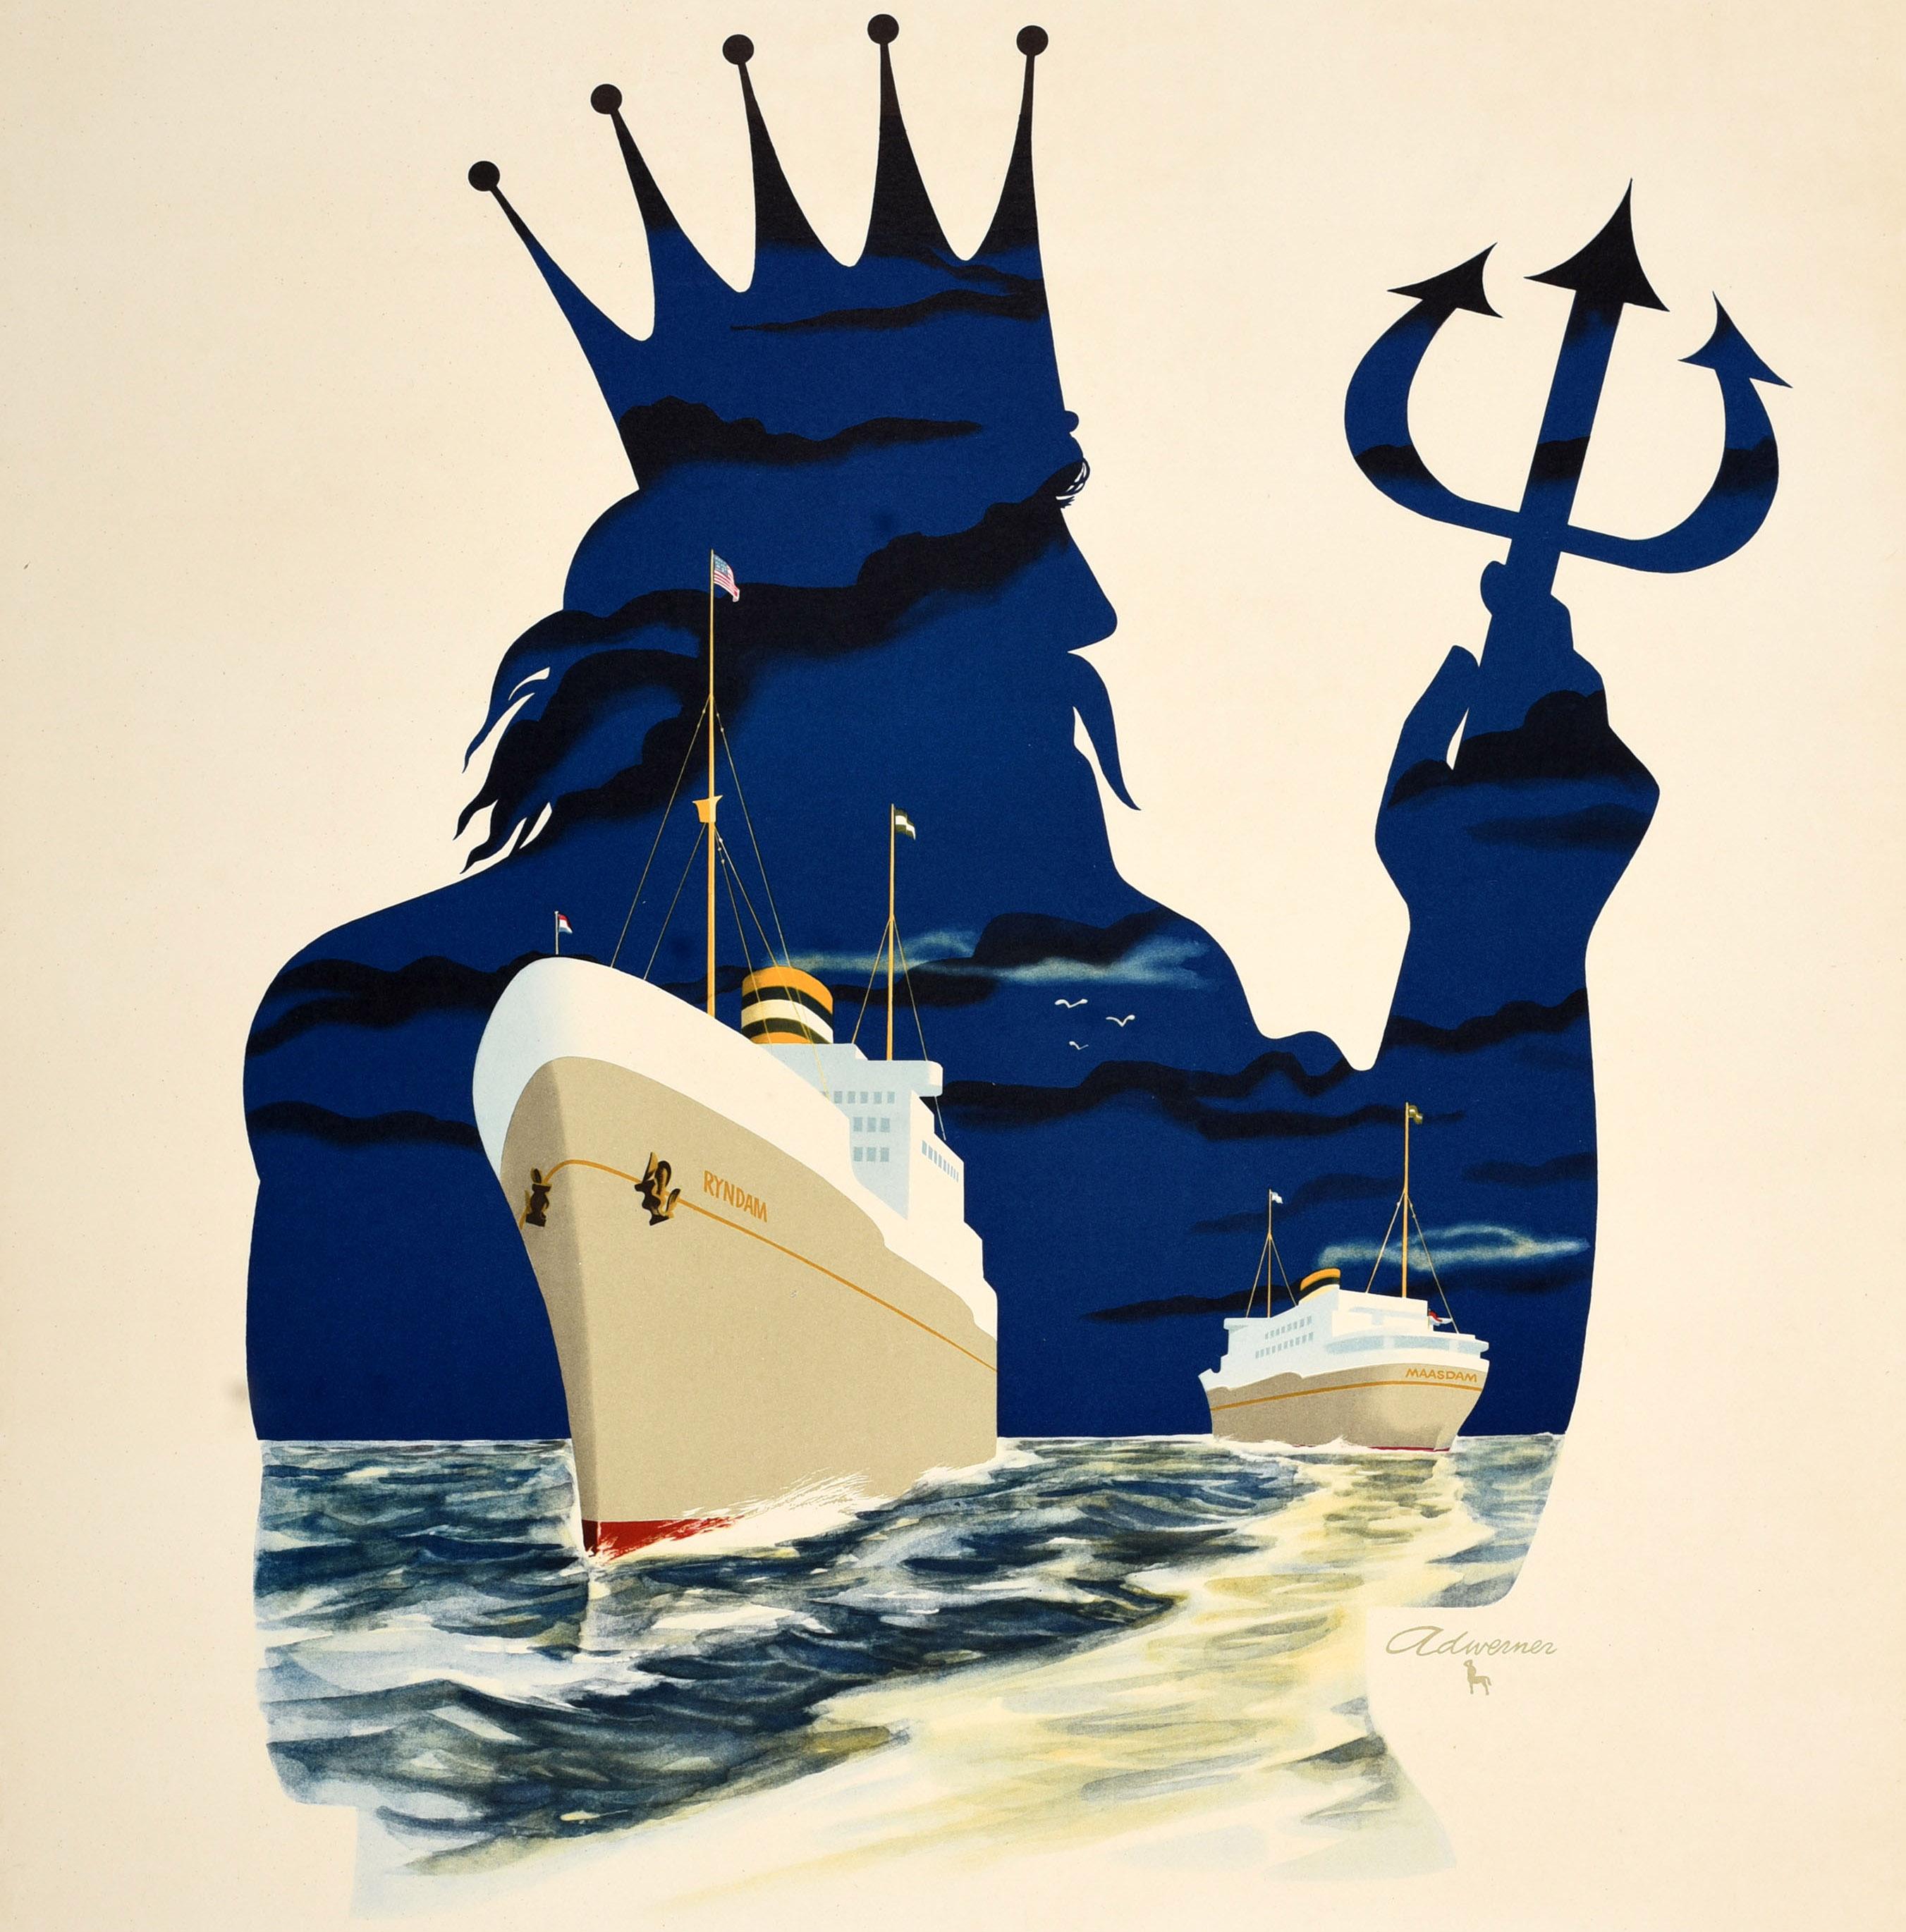 Original vintage cruise travel poster - A New Concept in Tourist Travel New Twins Ryndam Maasdam Comfort with Economy Holland-America Line - featuring a great design by the Dutch graphic designer Ad Werner (Adrianus Gerardus Werner; 1925-2017) of